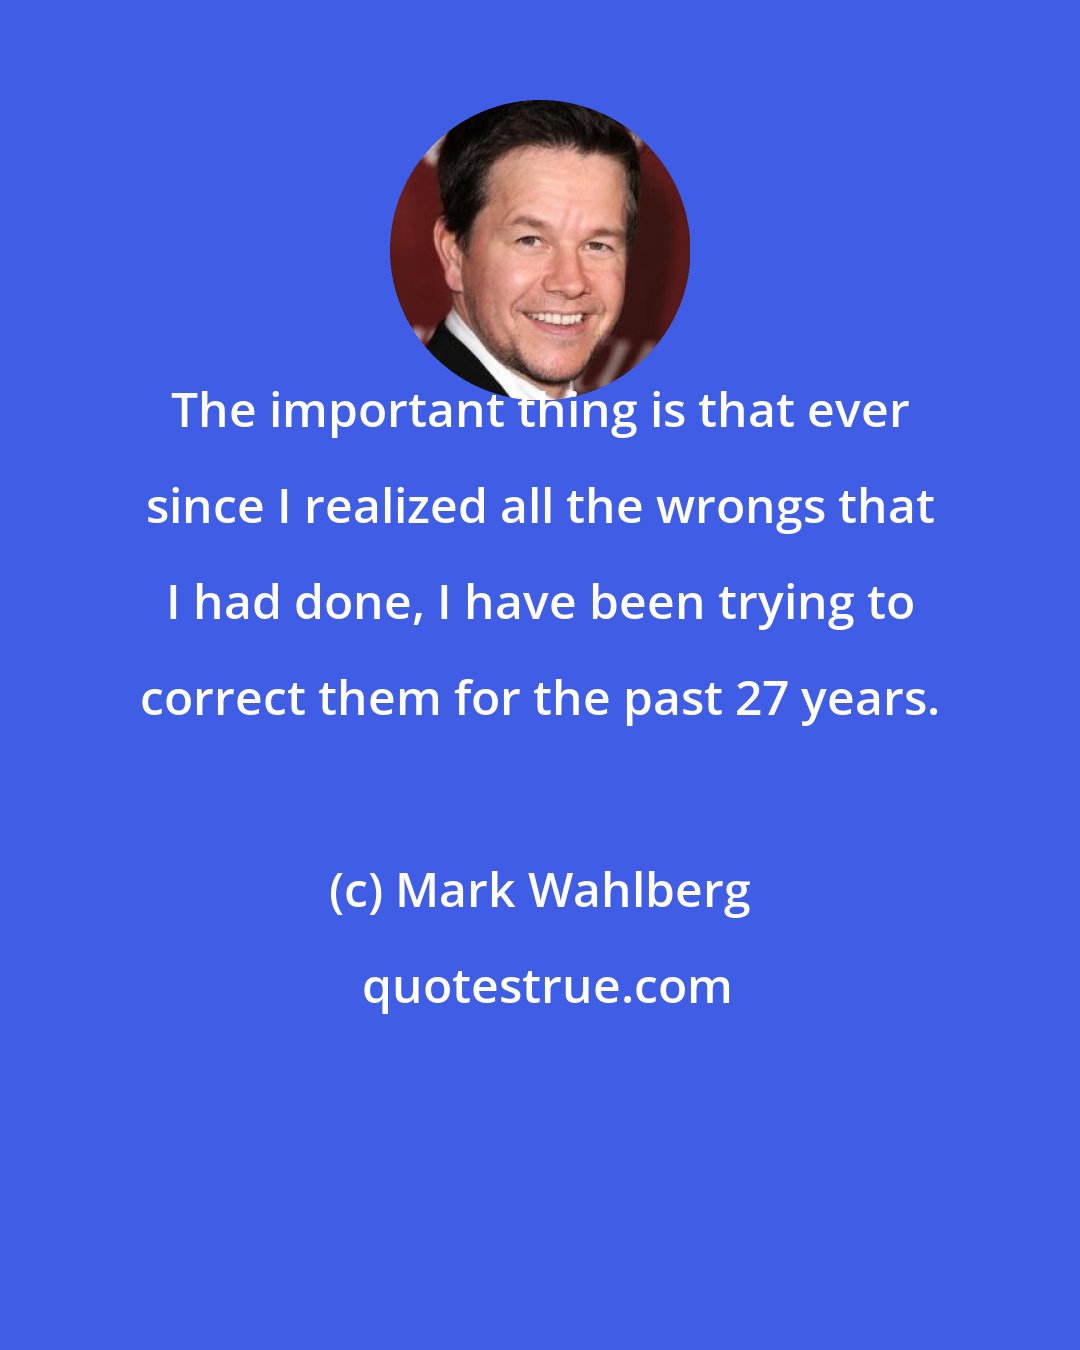 Mark Wahlberg: The important thing is that ever since I realized all the wrongs that I had done, I have been trying to correct them for the past 27 years.